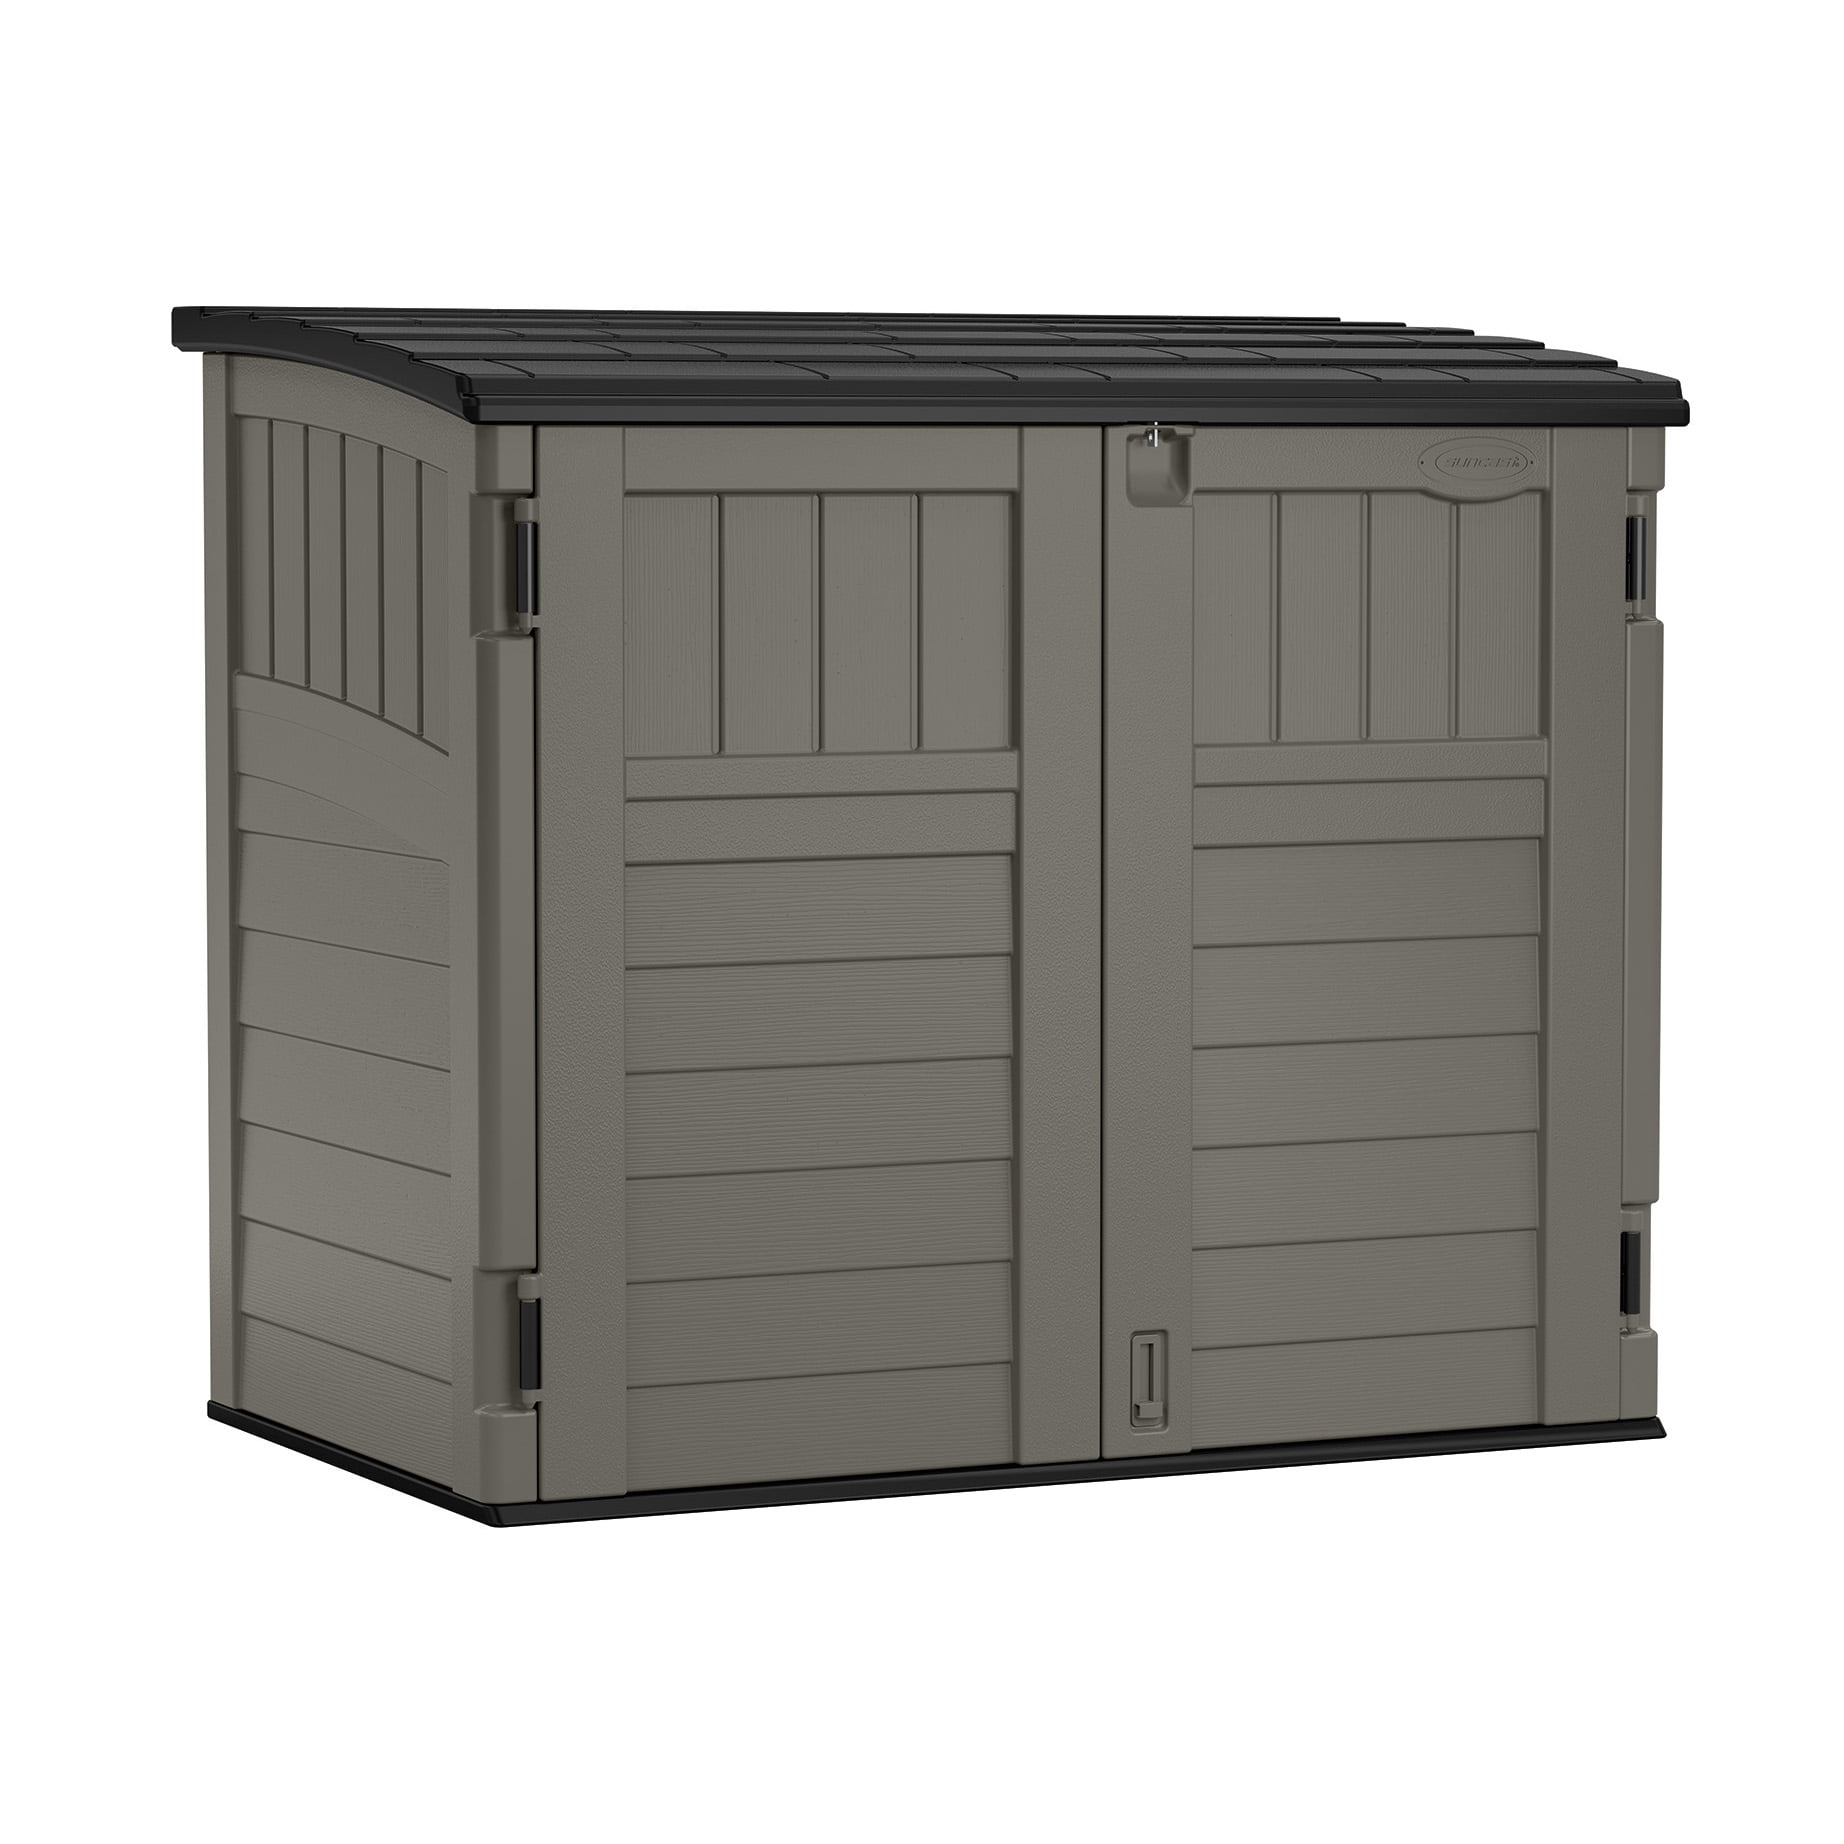 Suncast 34 cu. ft. Horizontal Resin Storage Shed for 